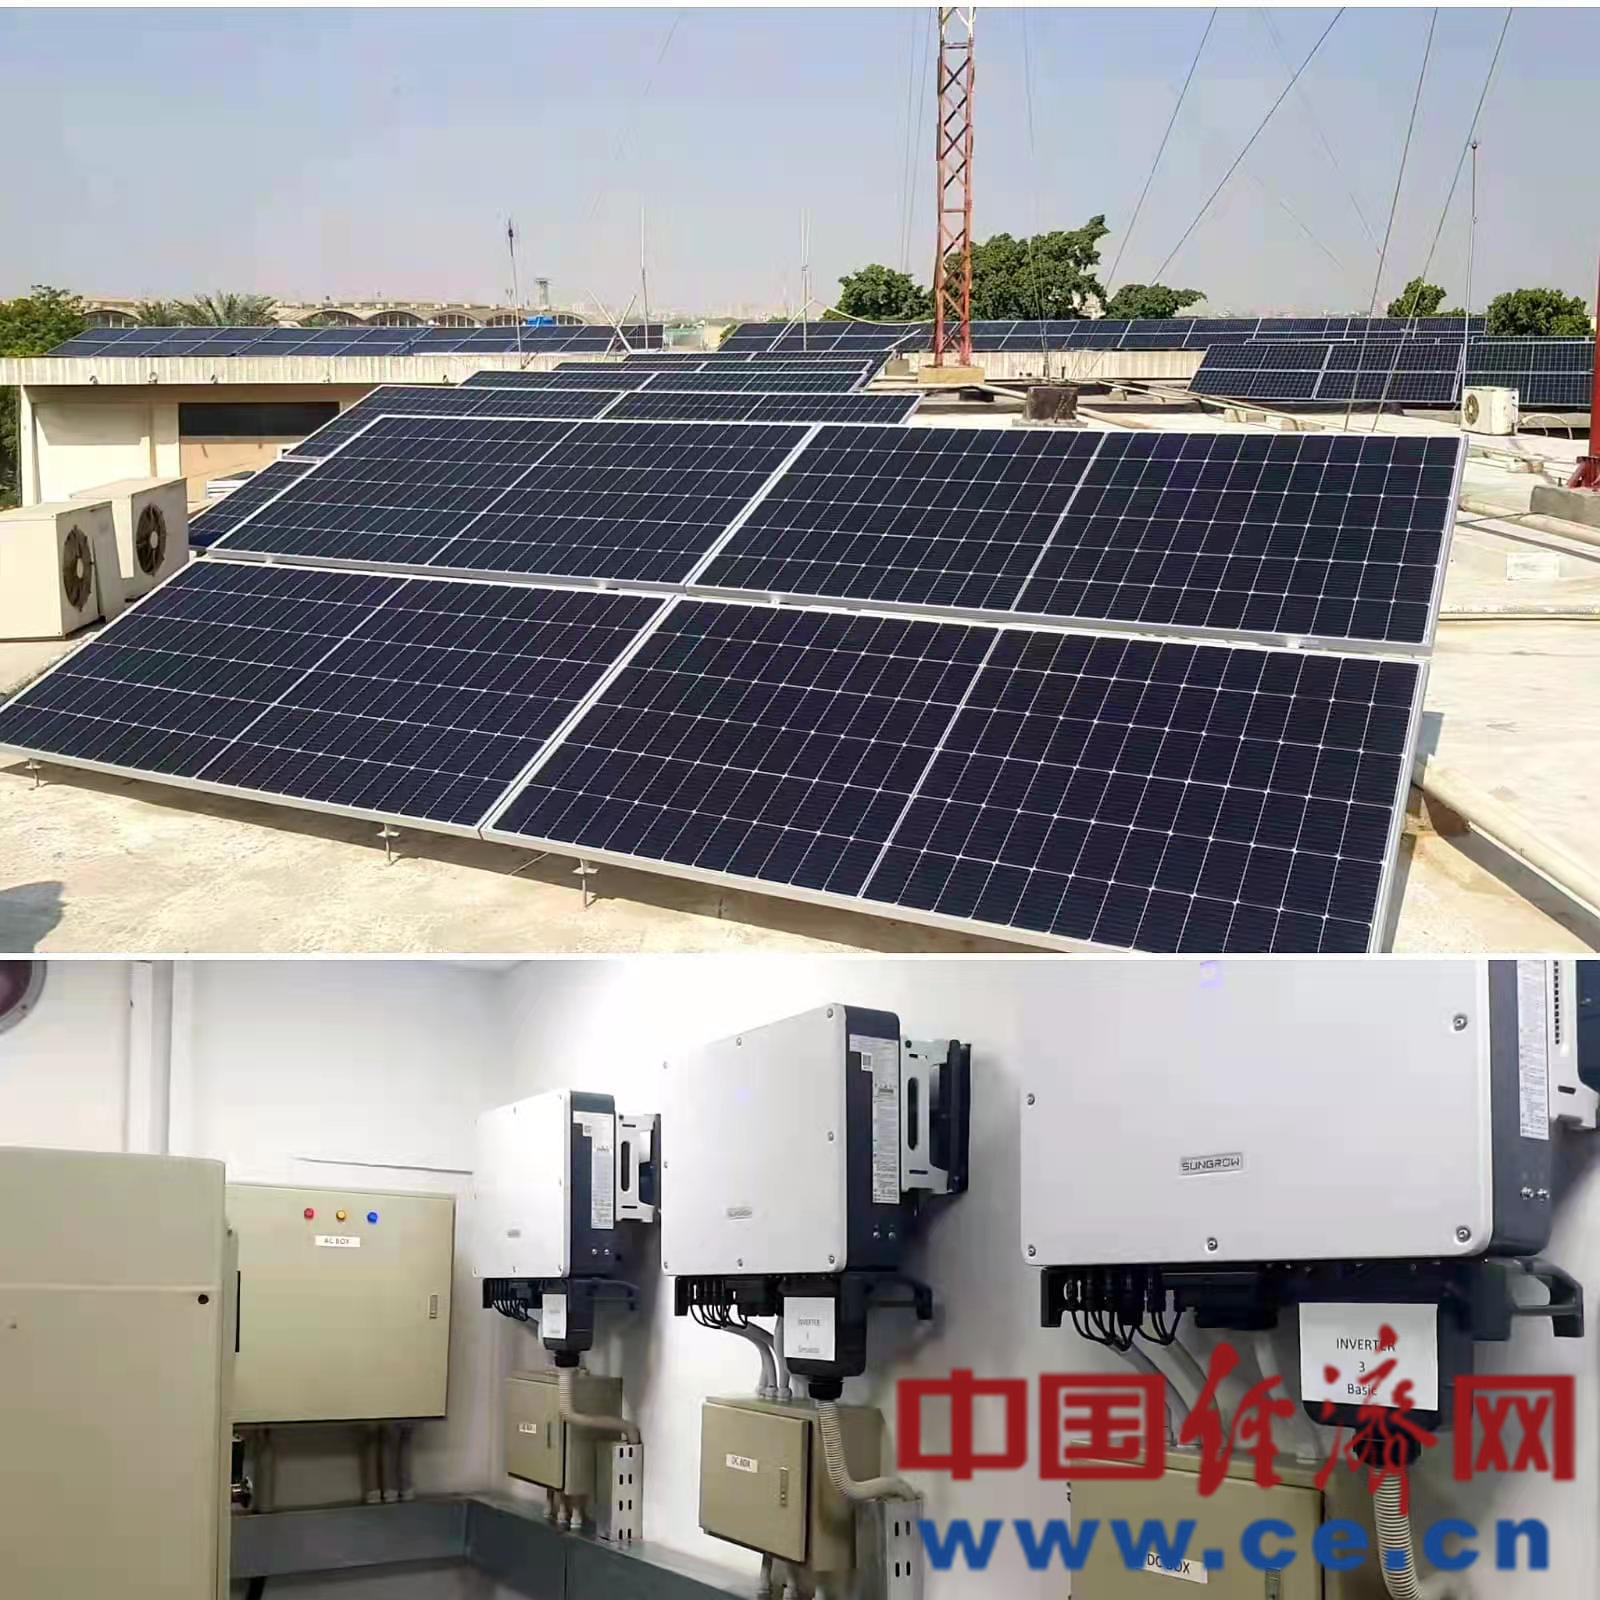 Chinese smart microgrid solution provider accelerating green energy program in Pakistan